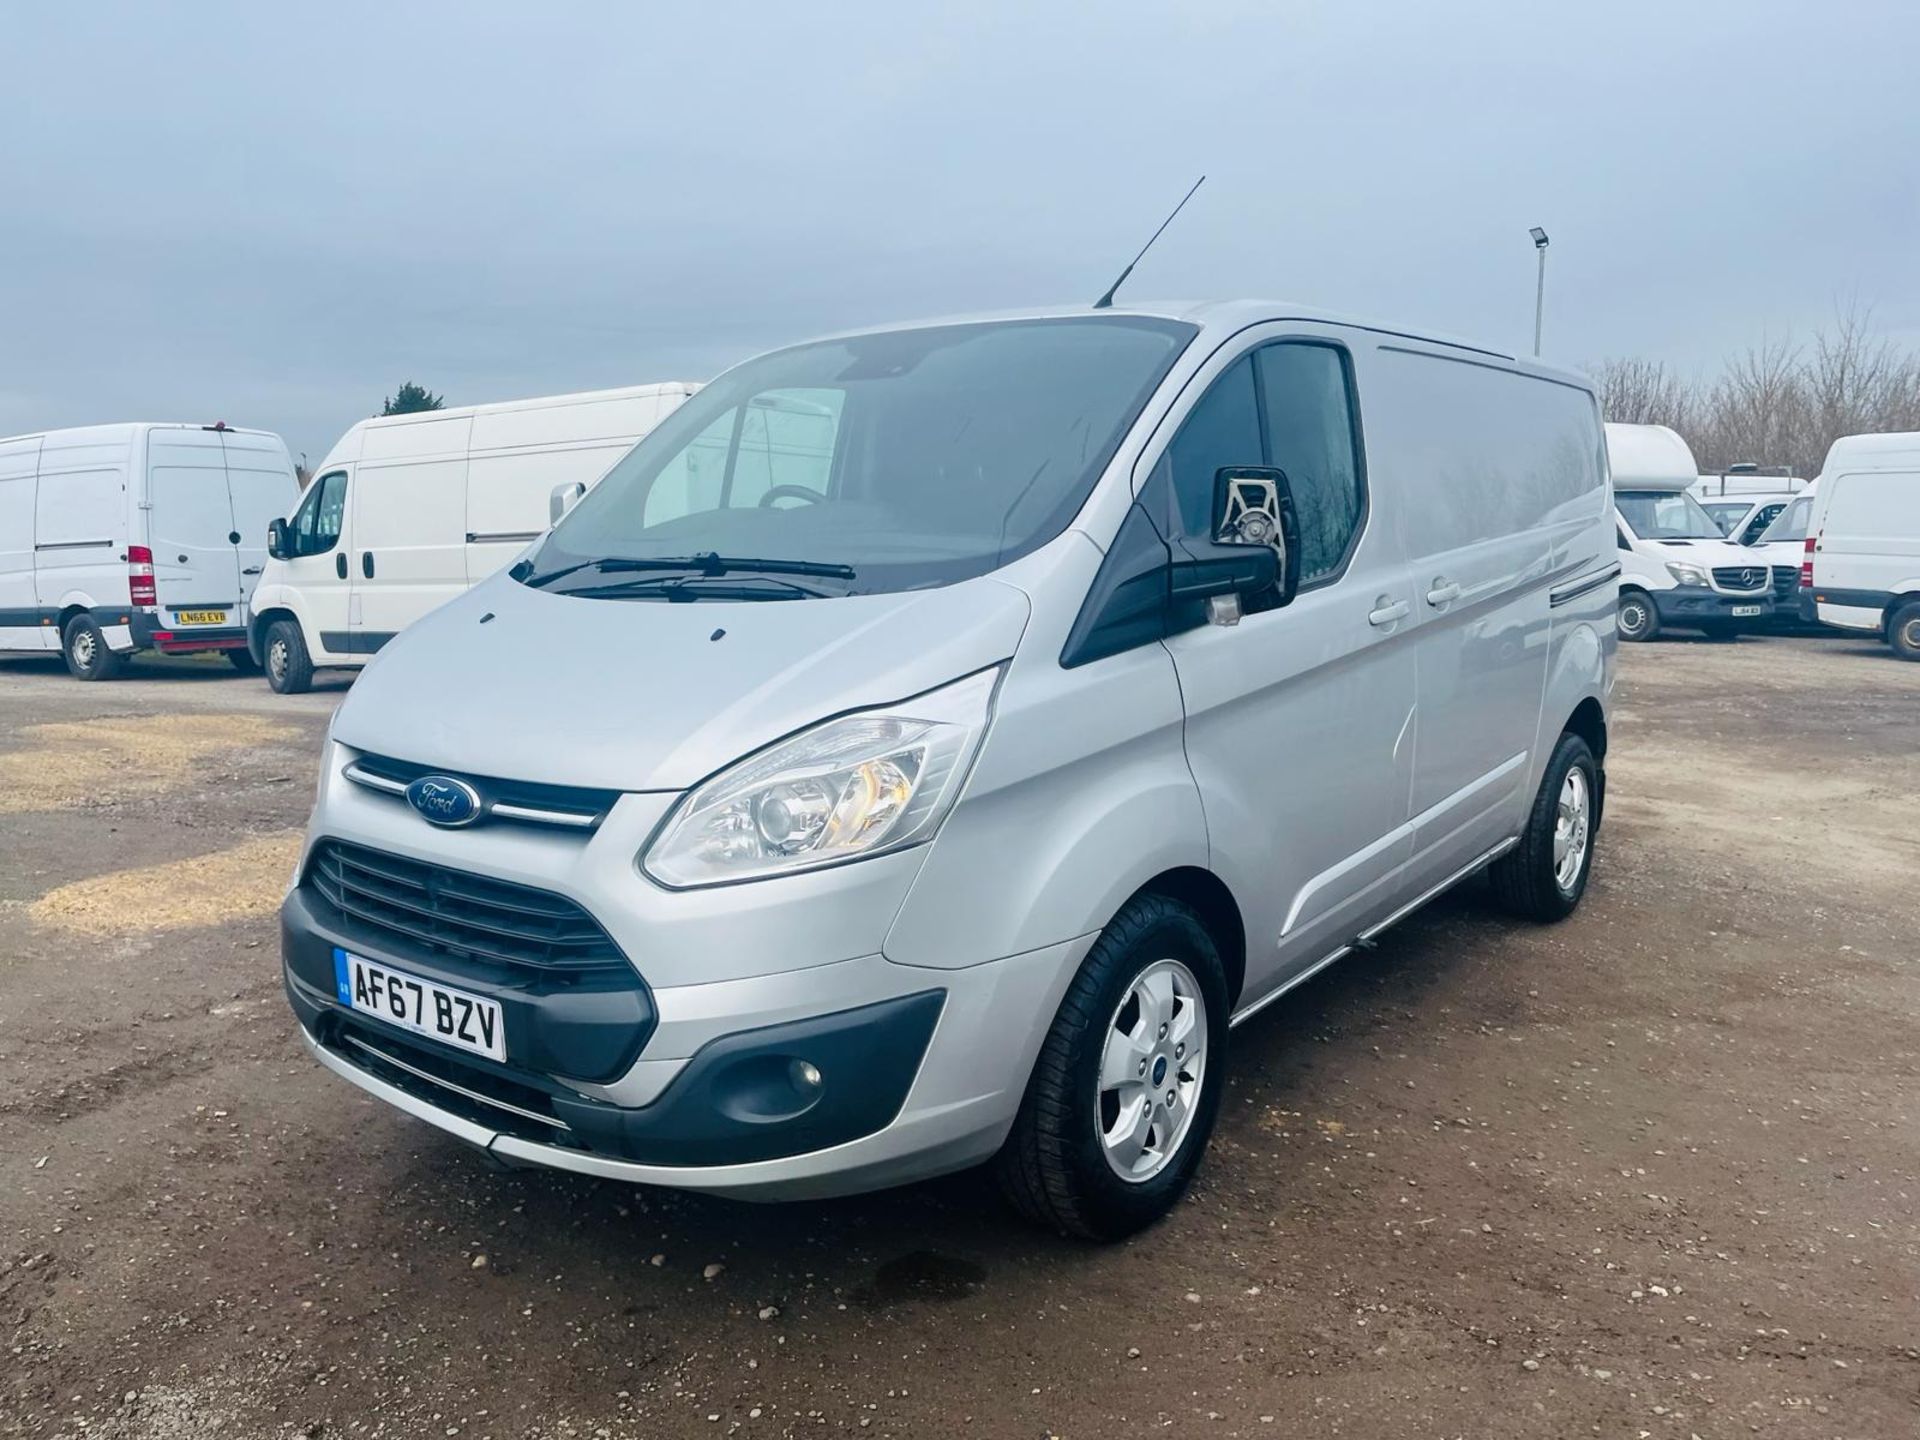 ** ON SALE ** Ford Transit Custom 130 2.0 Tdci Limited L1H1 PanelVan 2017'67 Reg'-1 Previous Owner - Image 3 of 27